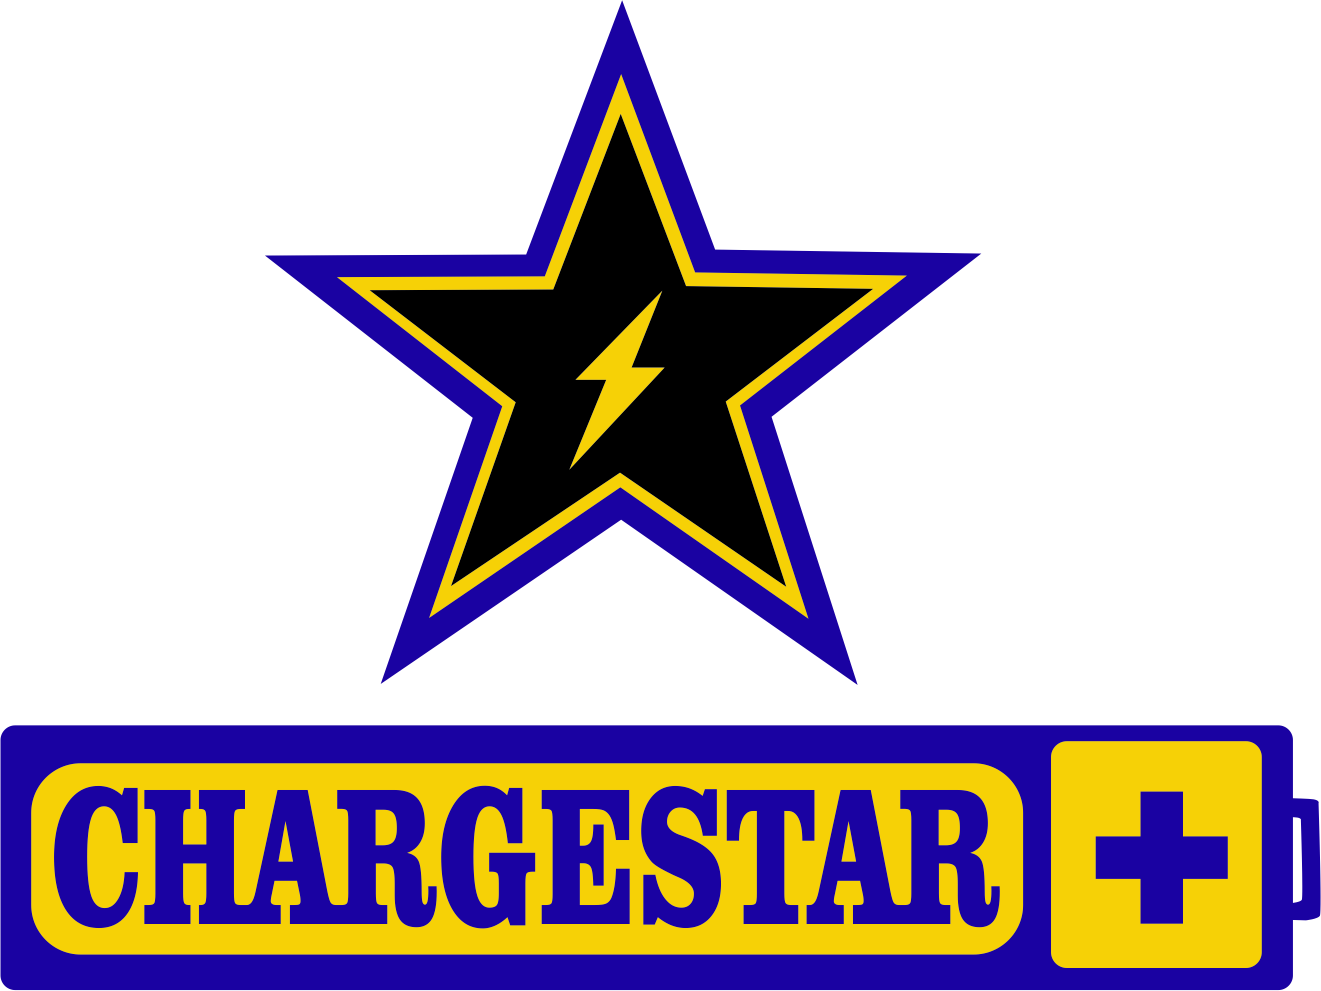 CHARGESTAR